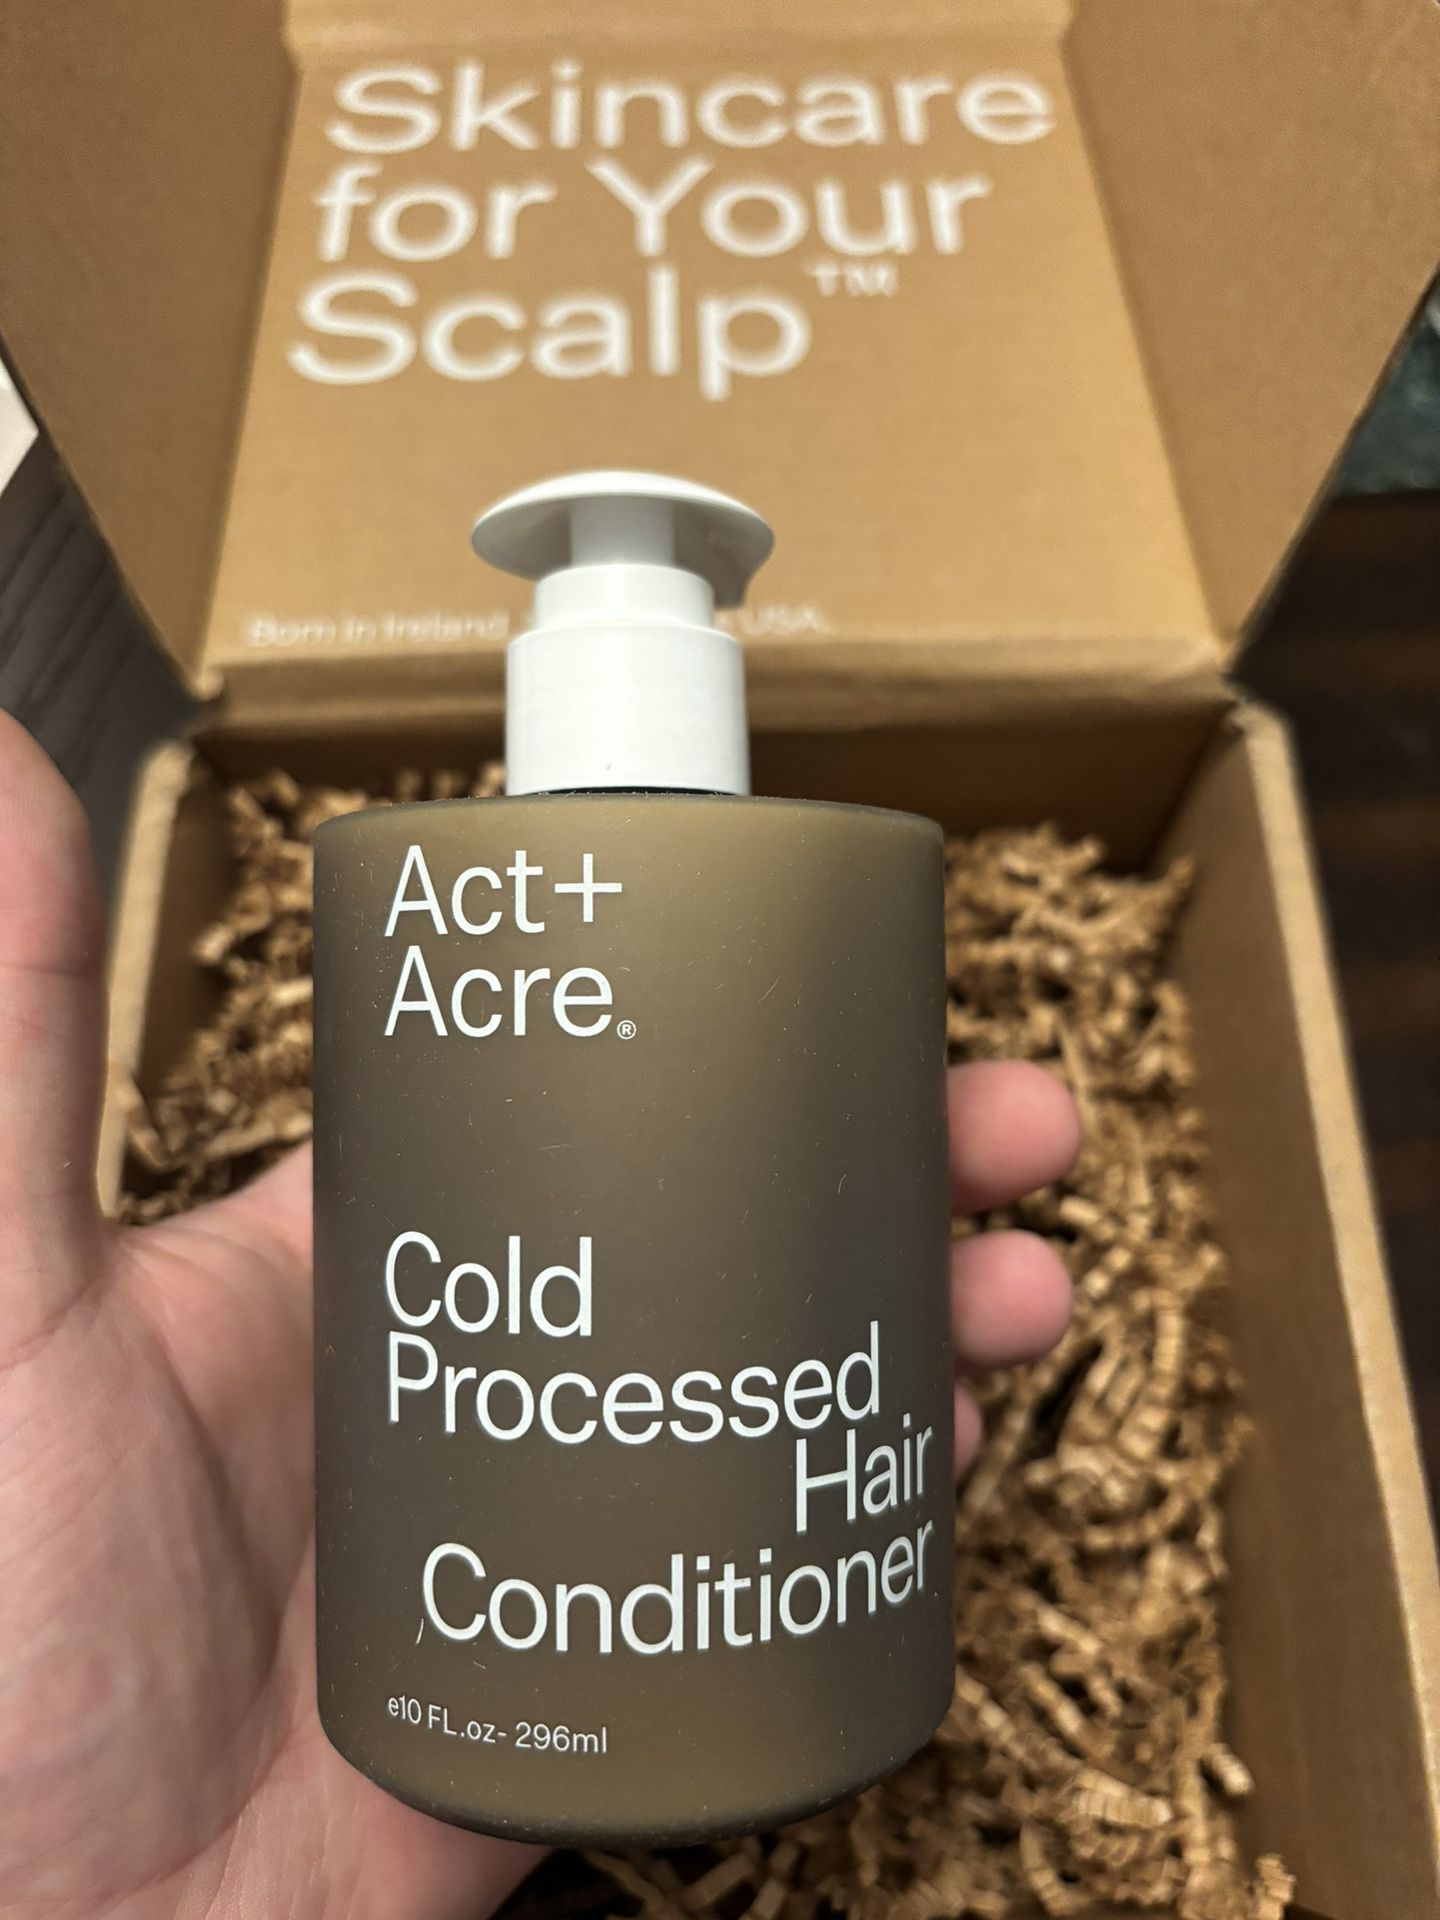 NEW IN BOX - Act + Acre, Cold Processed Hair Conditioner, 10.0 Fl. Oz.  MSRP $80